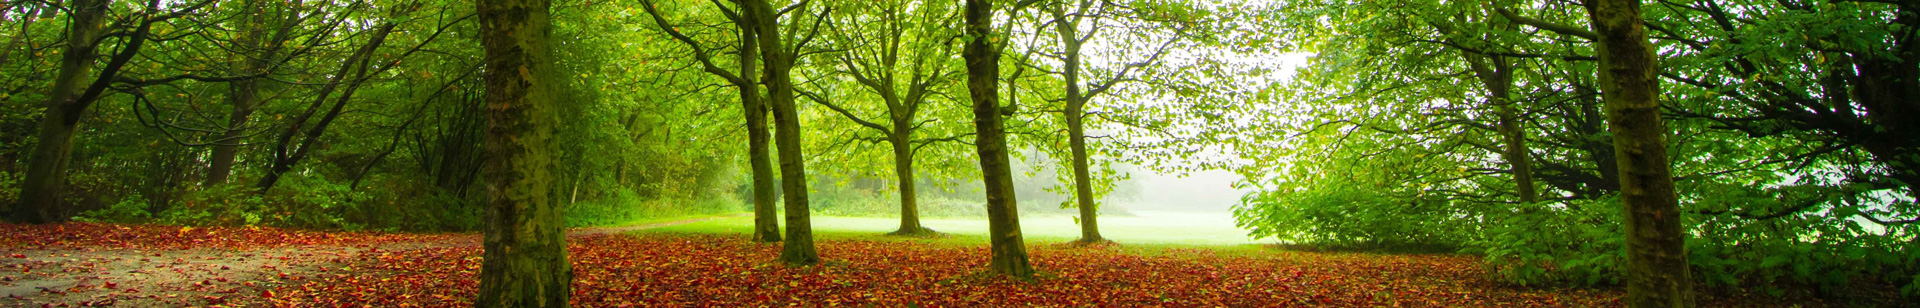 Trees with brown leaves on ground banner